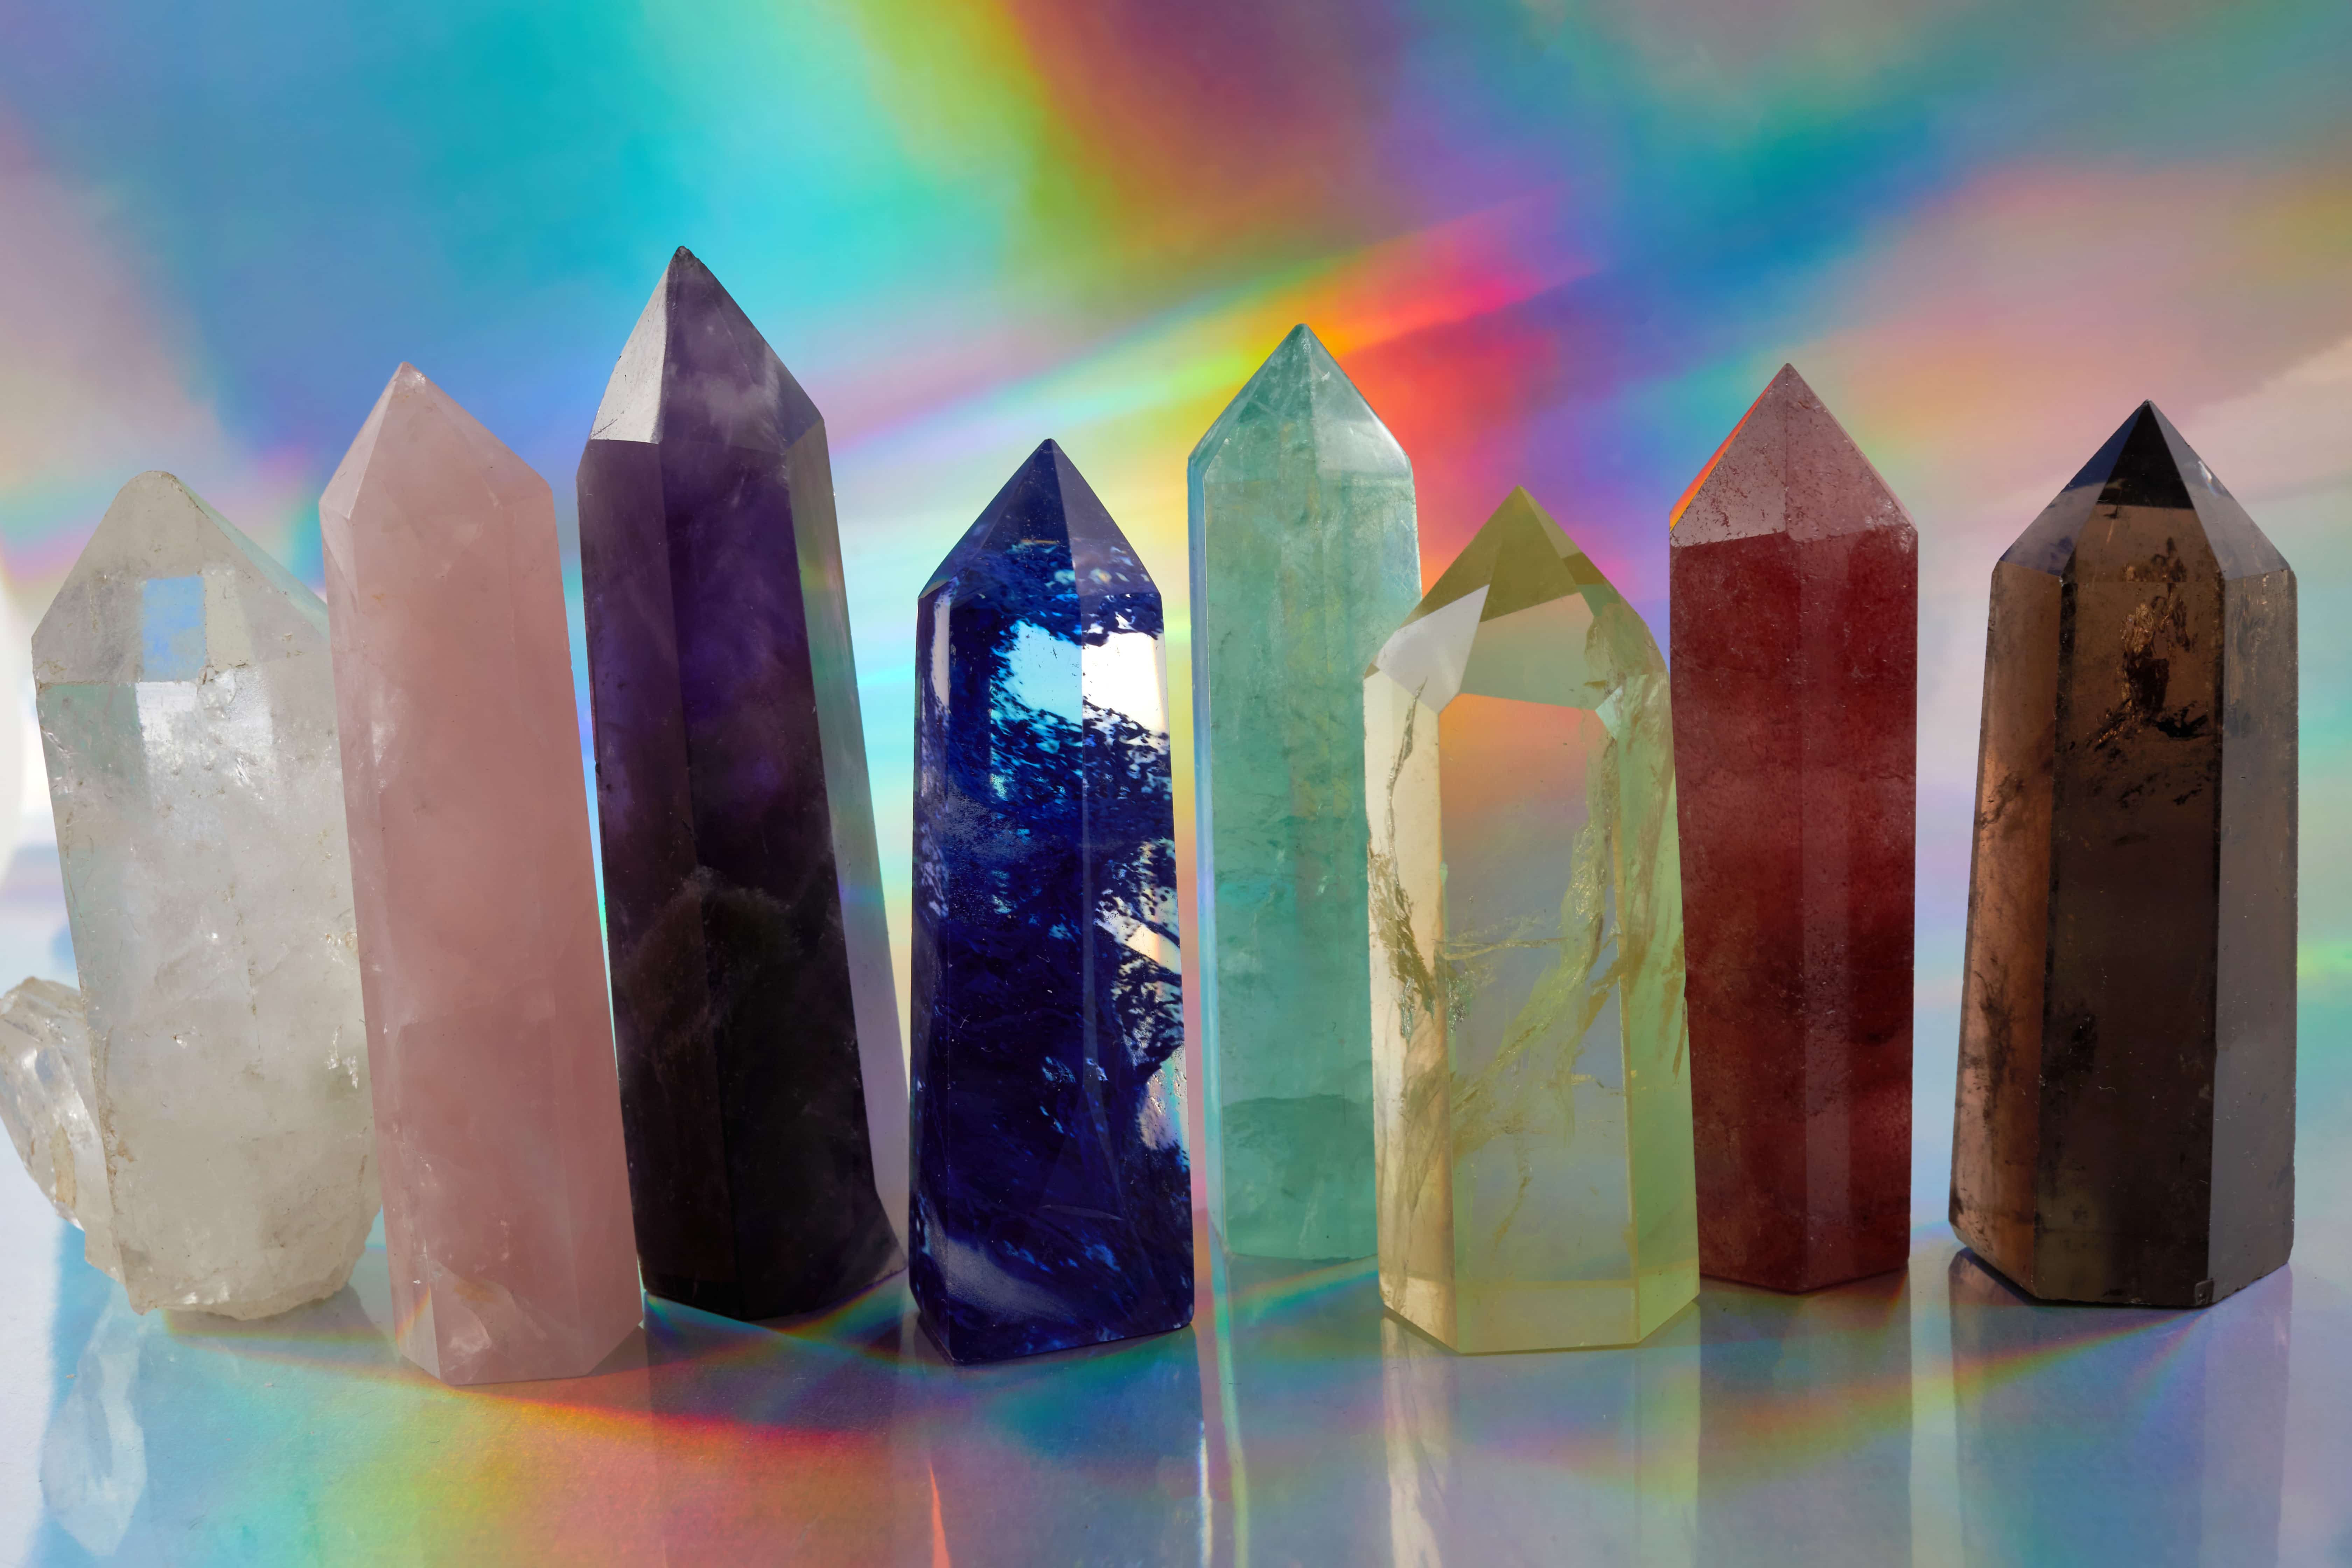 Eight reiki crystals side by side in multiple colors.